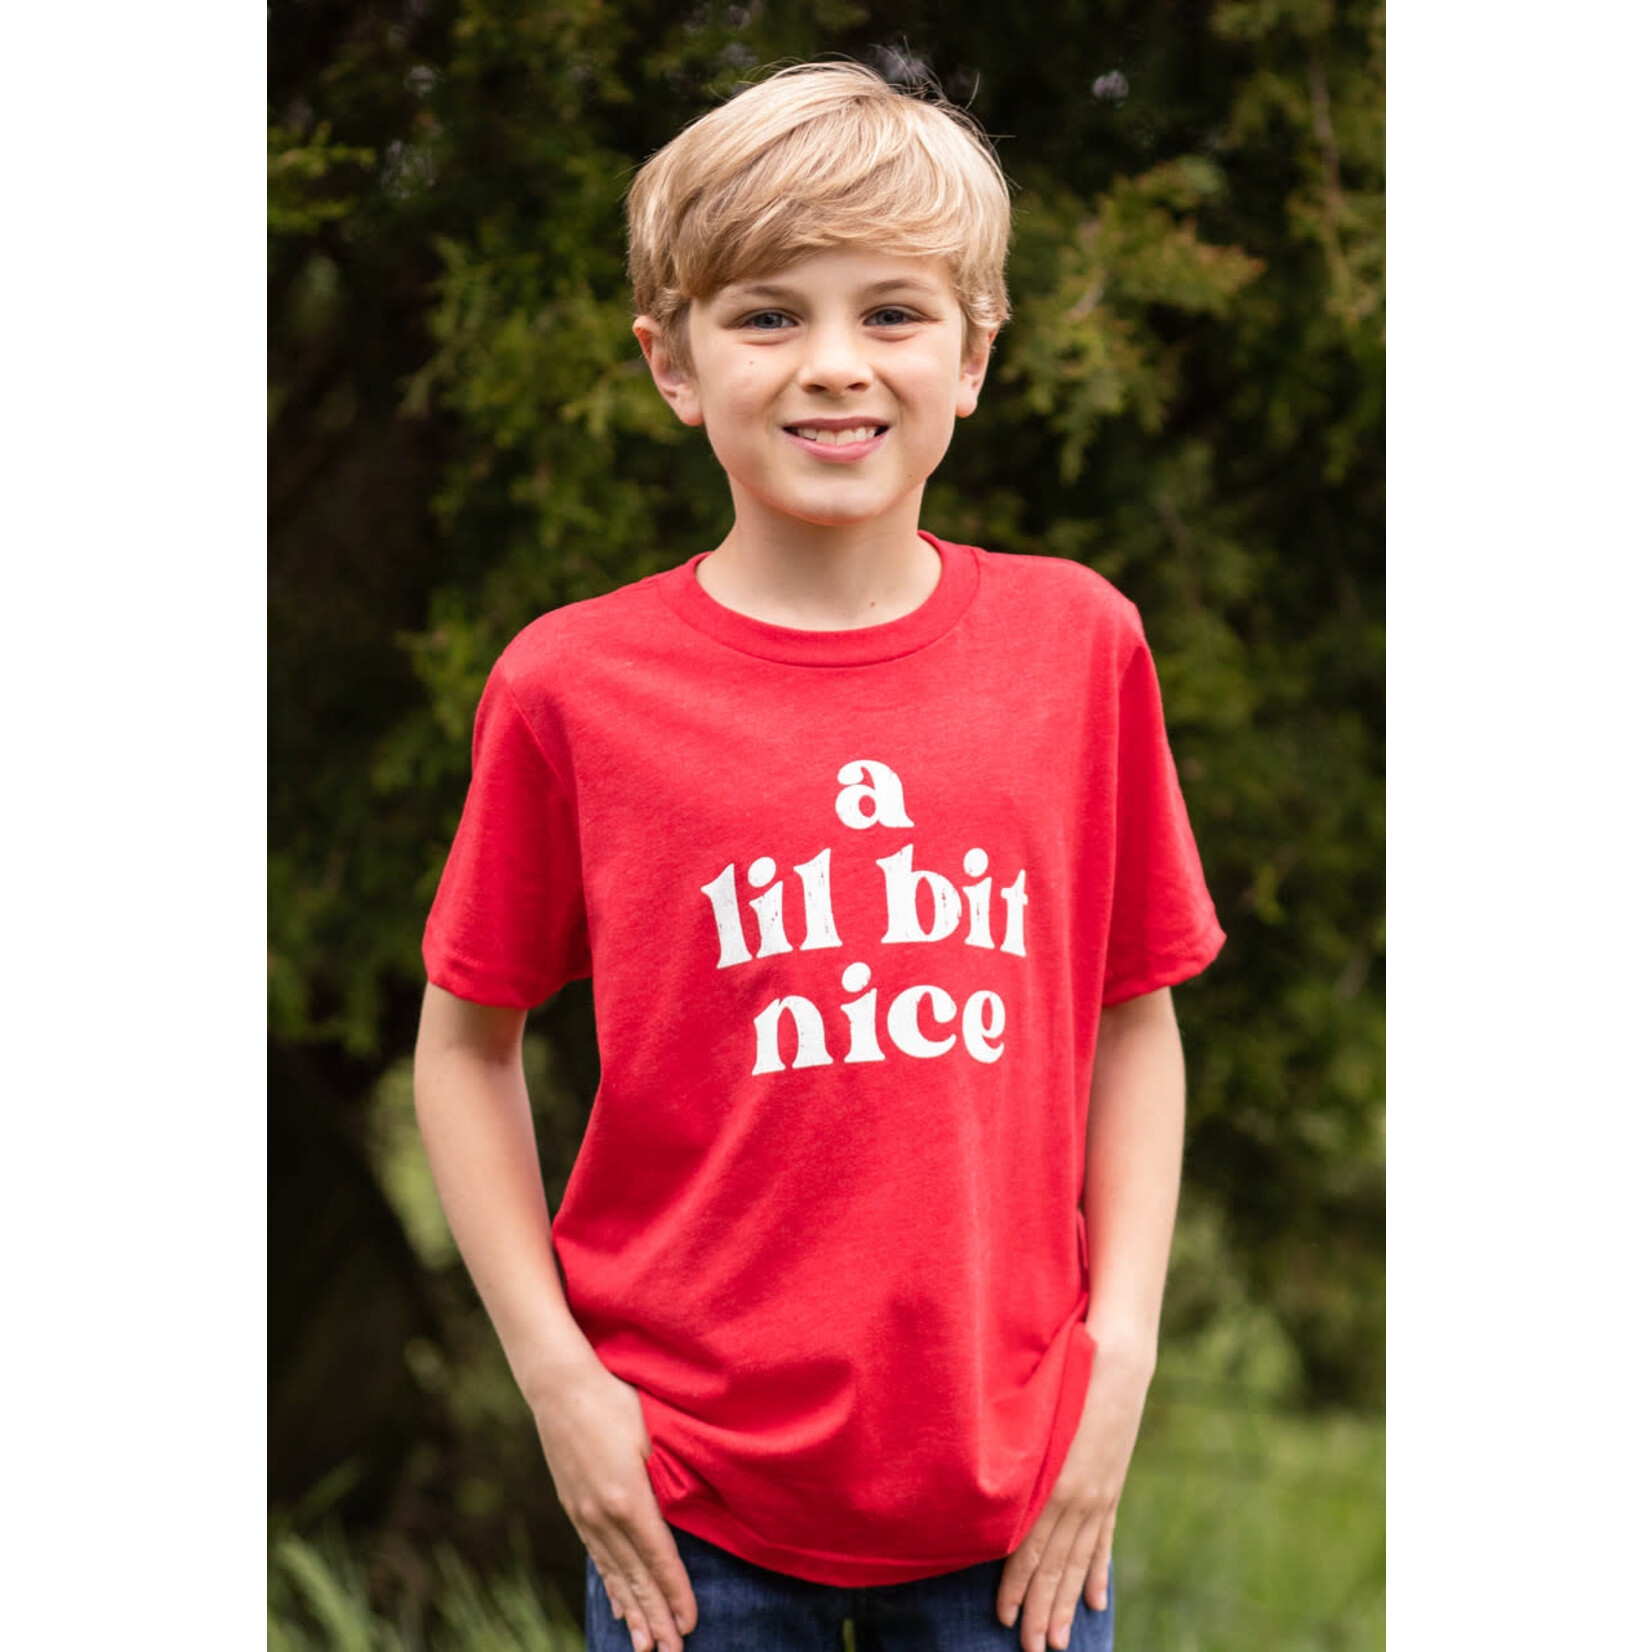 Southern Fried Design A lil bit nice - Toddler Tee